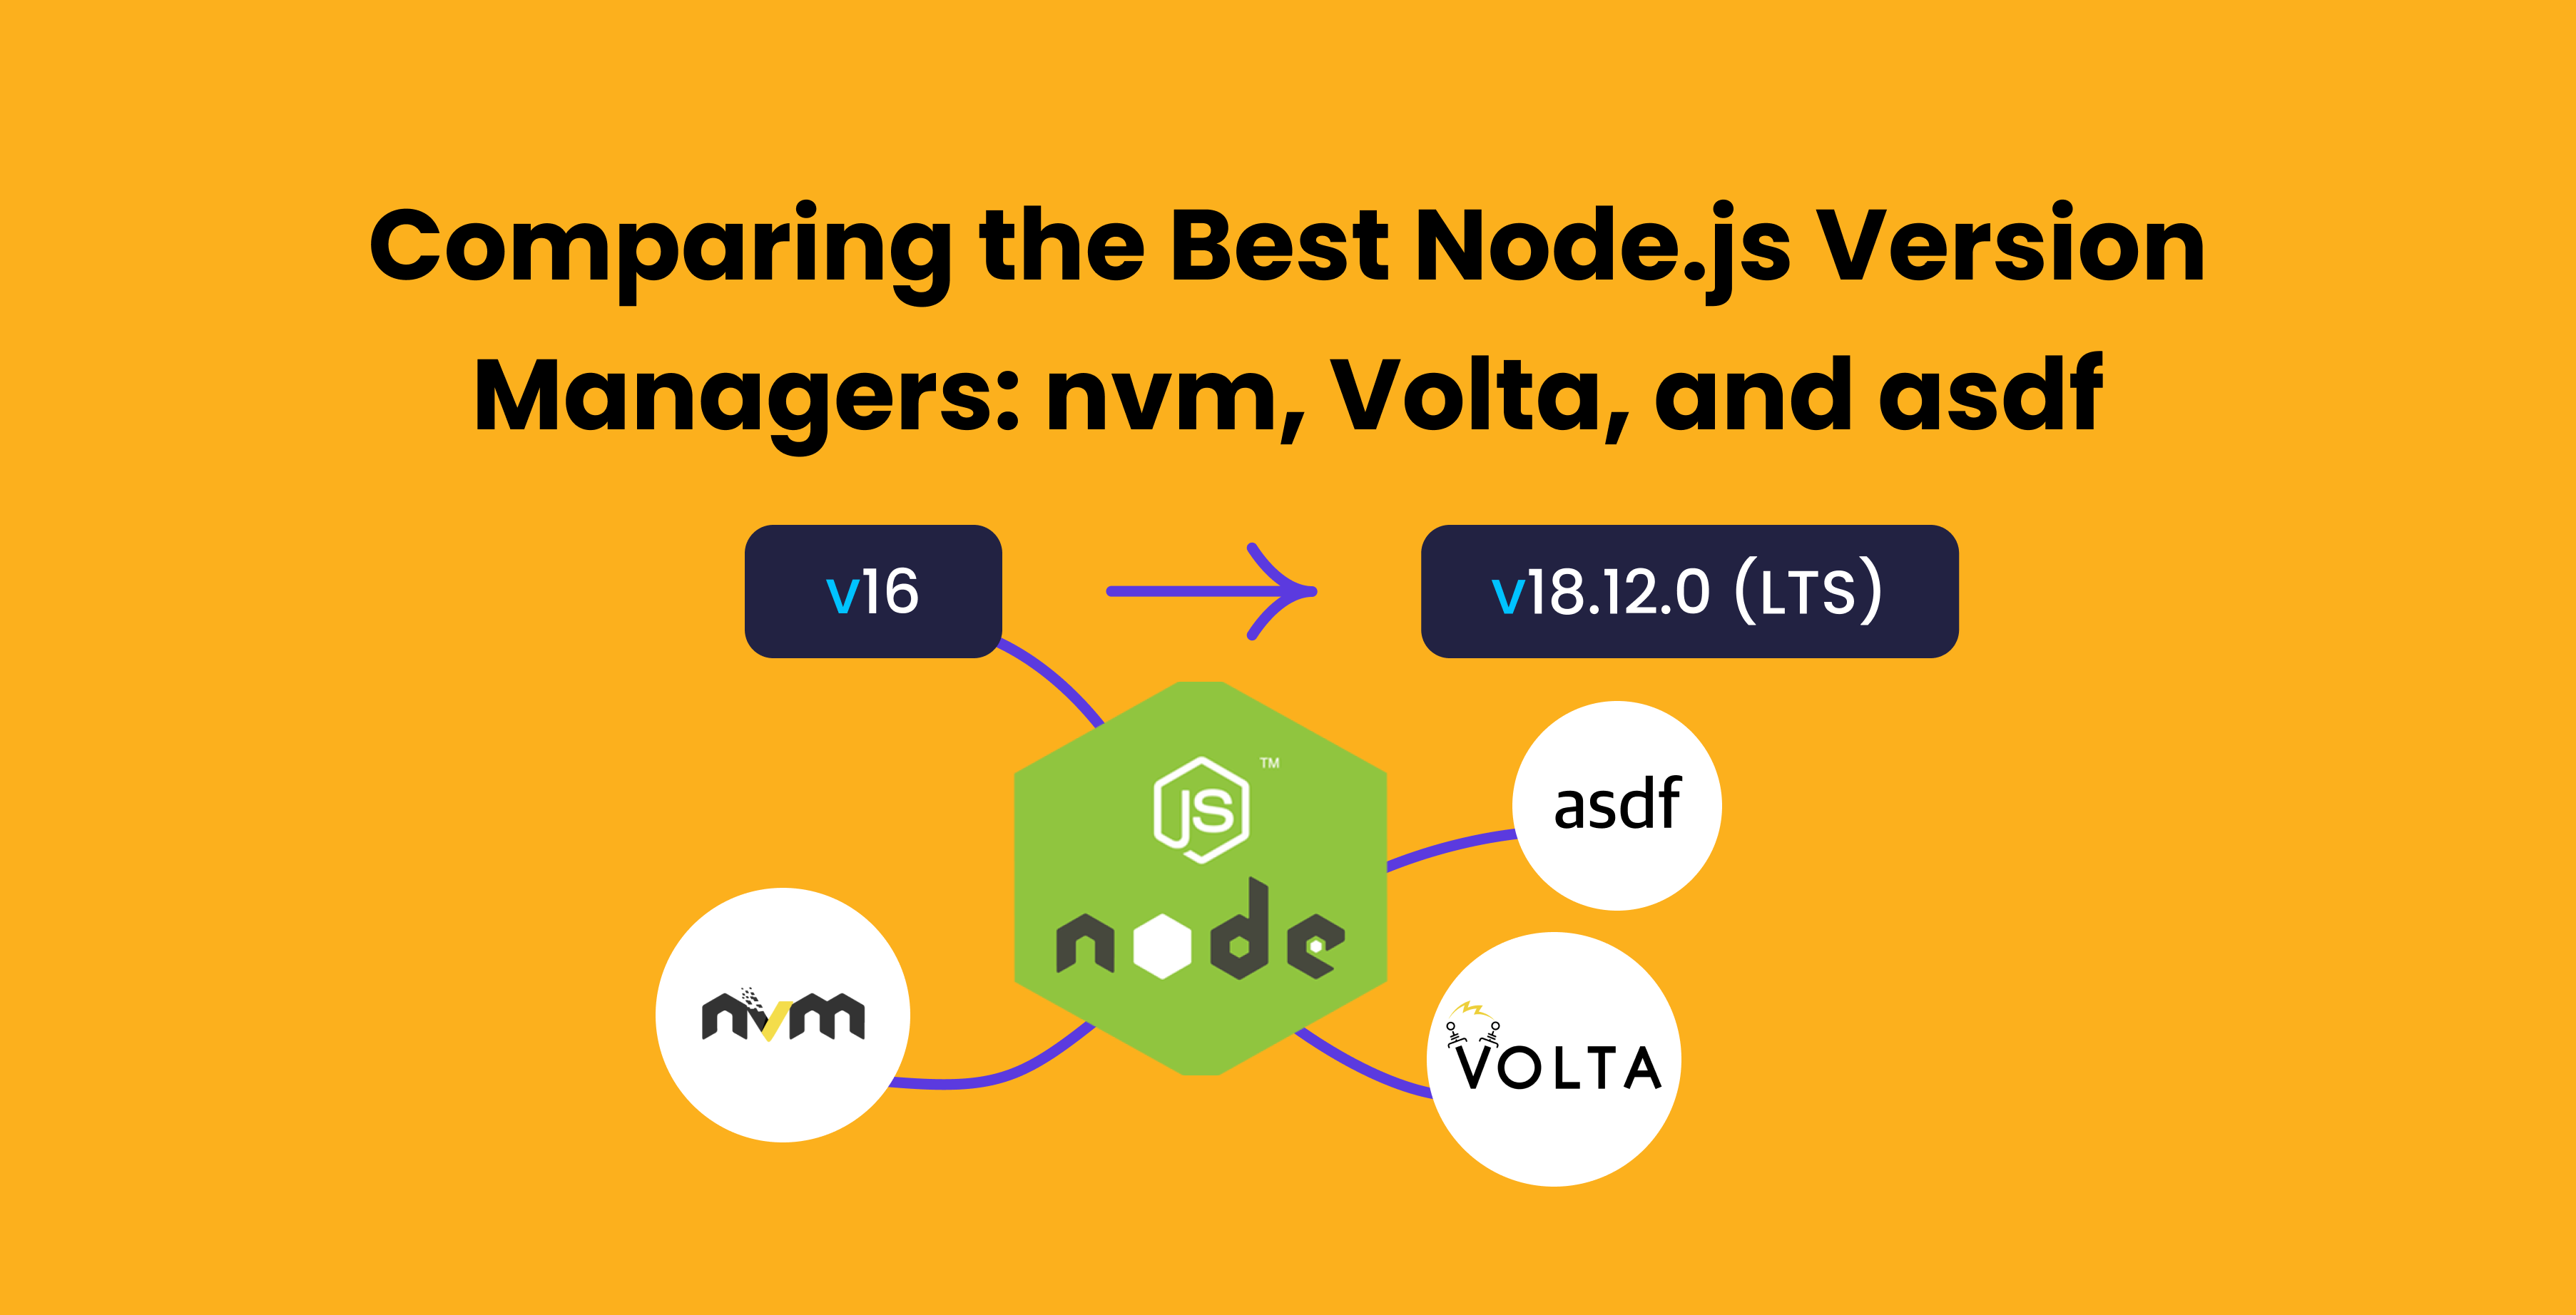 Comparing the Best Node.js Version Managers: nvm, Volta, and asdf